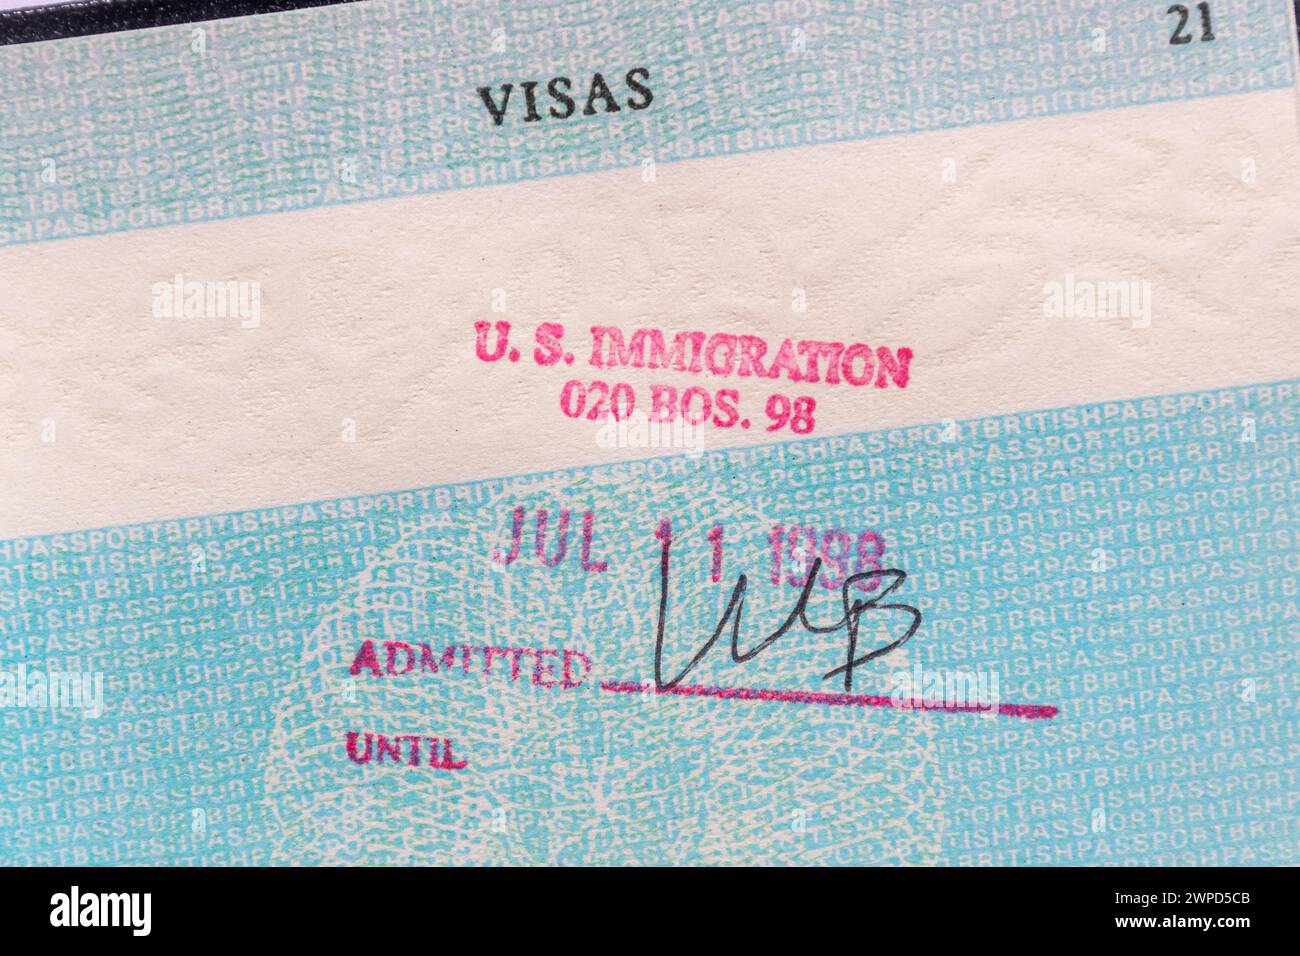 US Immigration stamp in British passport, stamped on entry into BOS Boston Logan international airport in Massachusetts USA Stock Photo